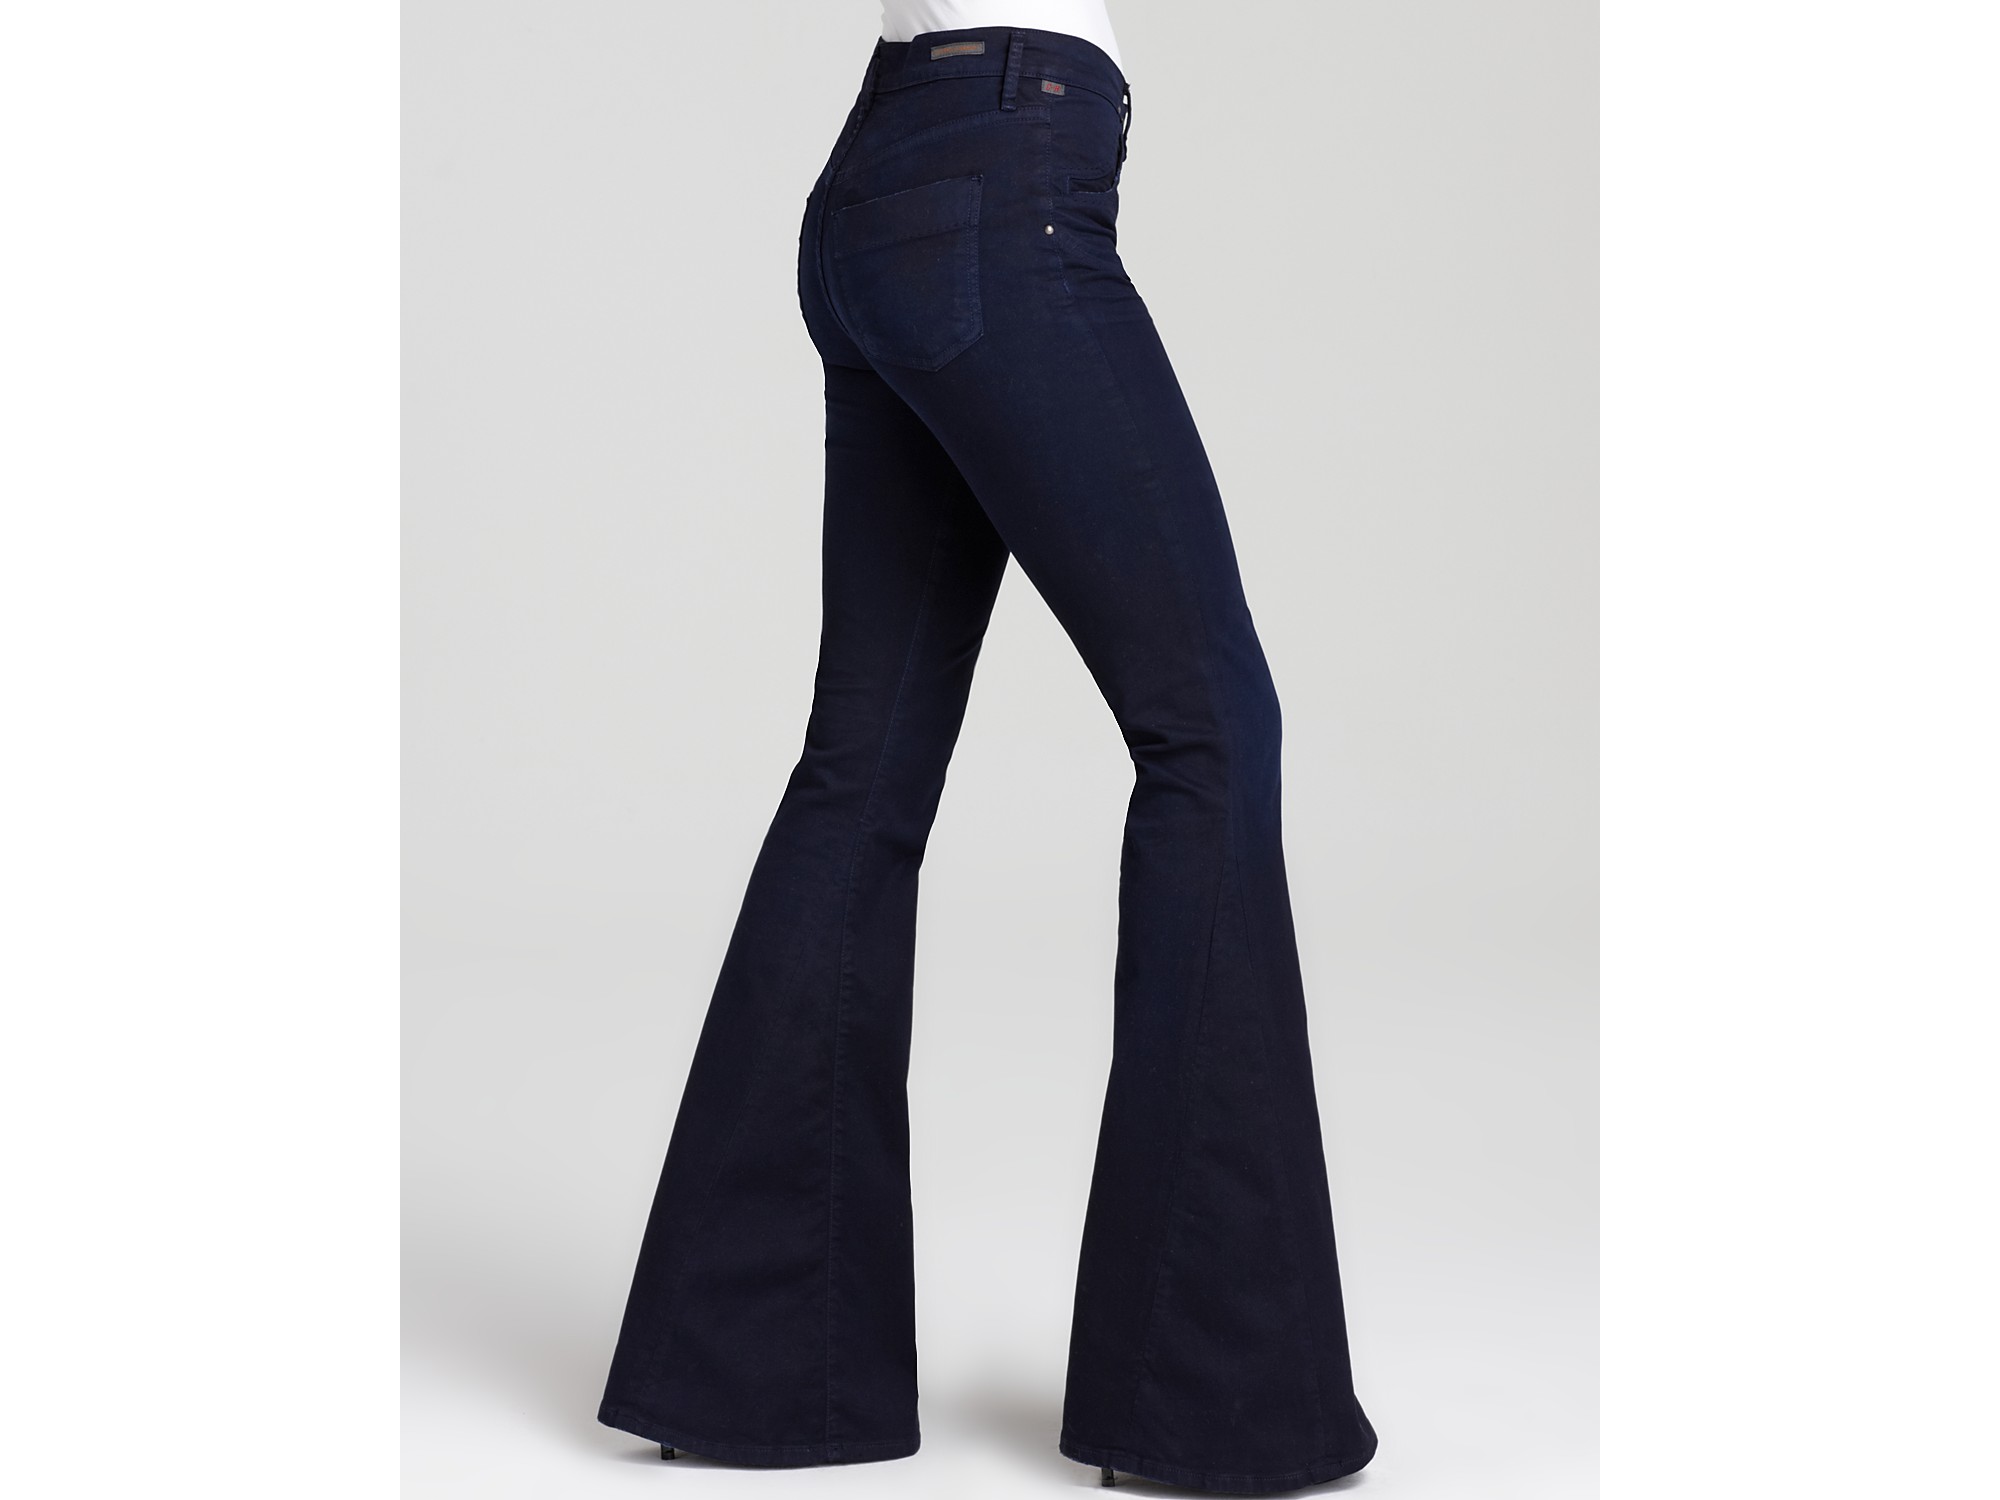 Lyst - Ash Citizens Of Humanity Angie Super-flare Jeans in Midnight ...